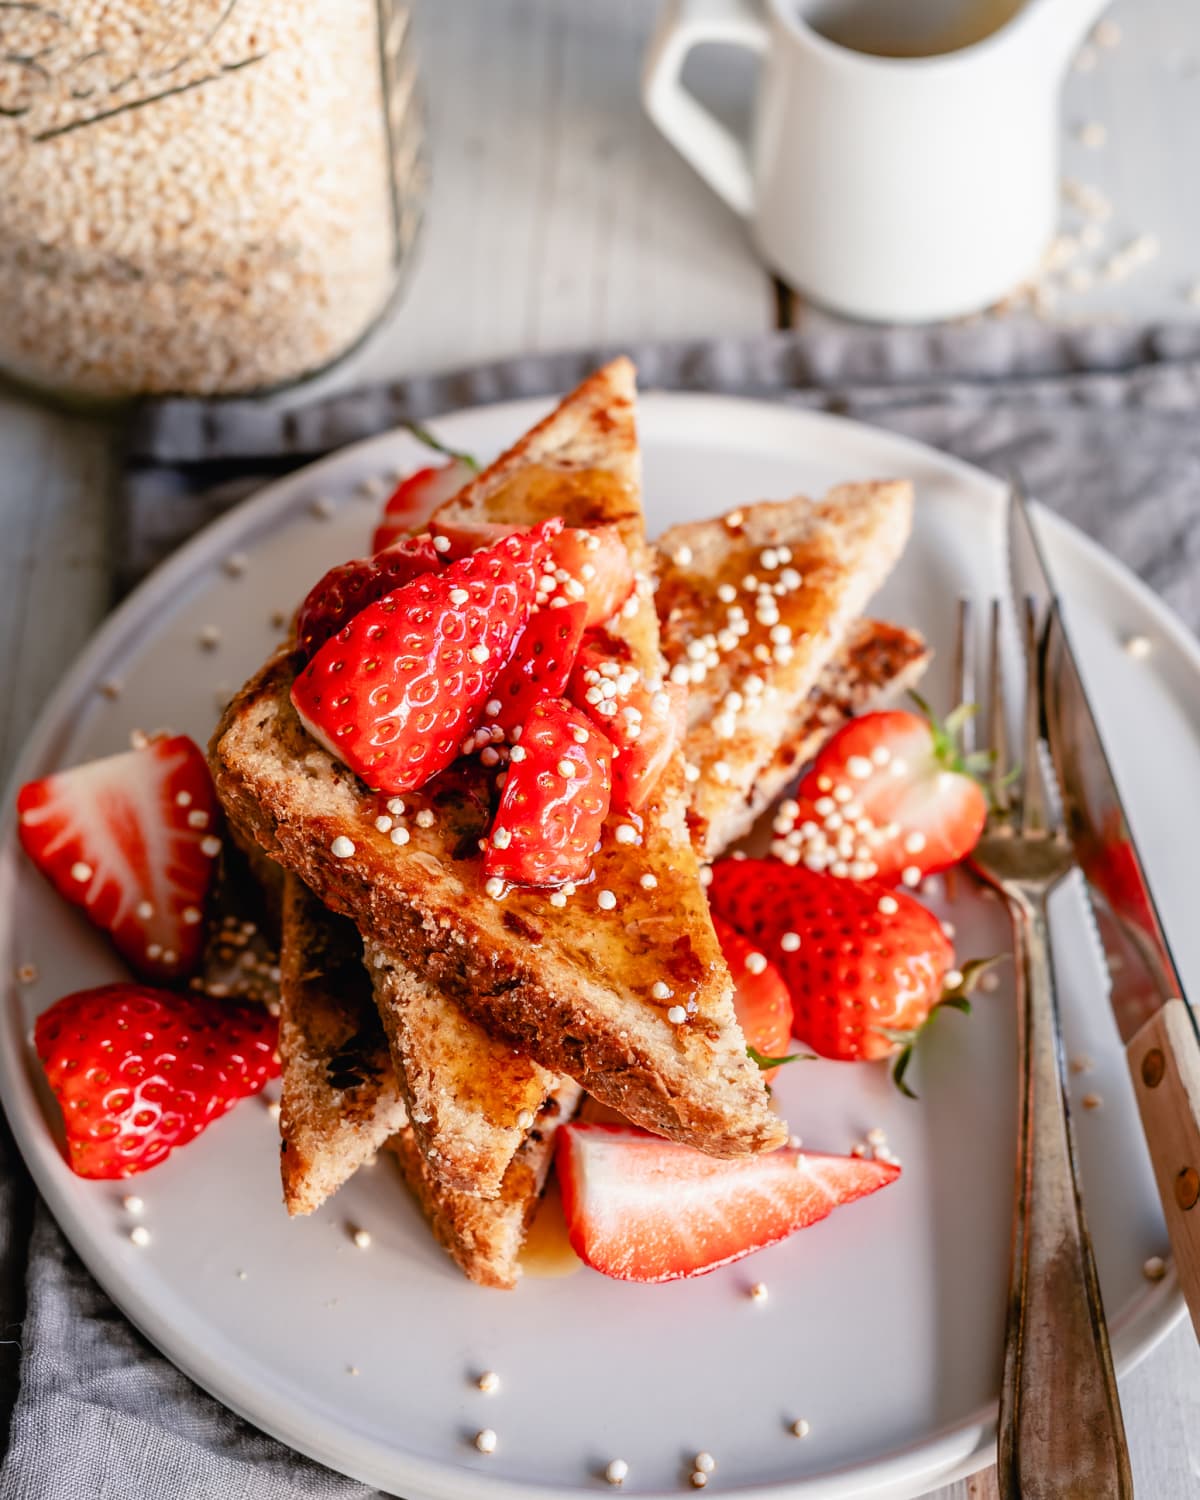 Slices of cinnamon toast, topped with strawberries